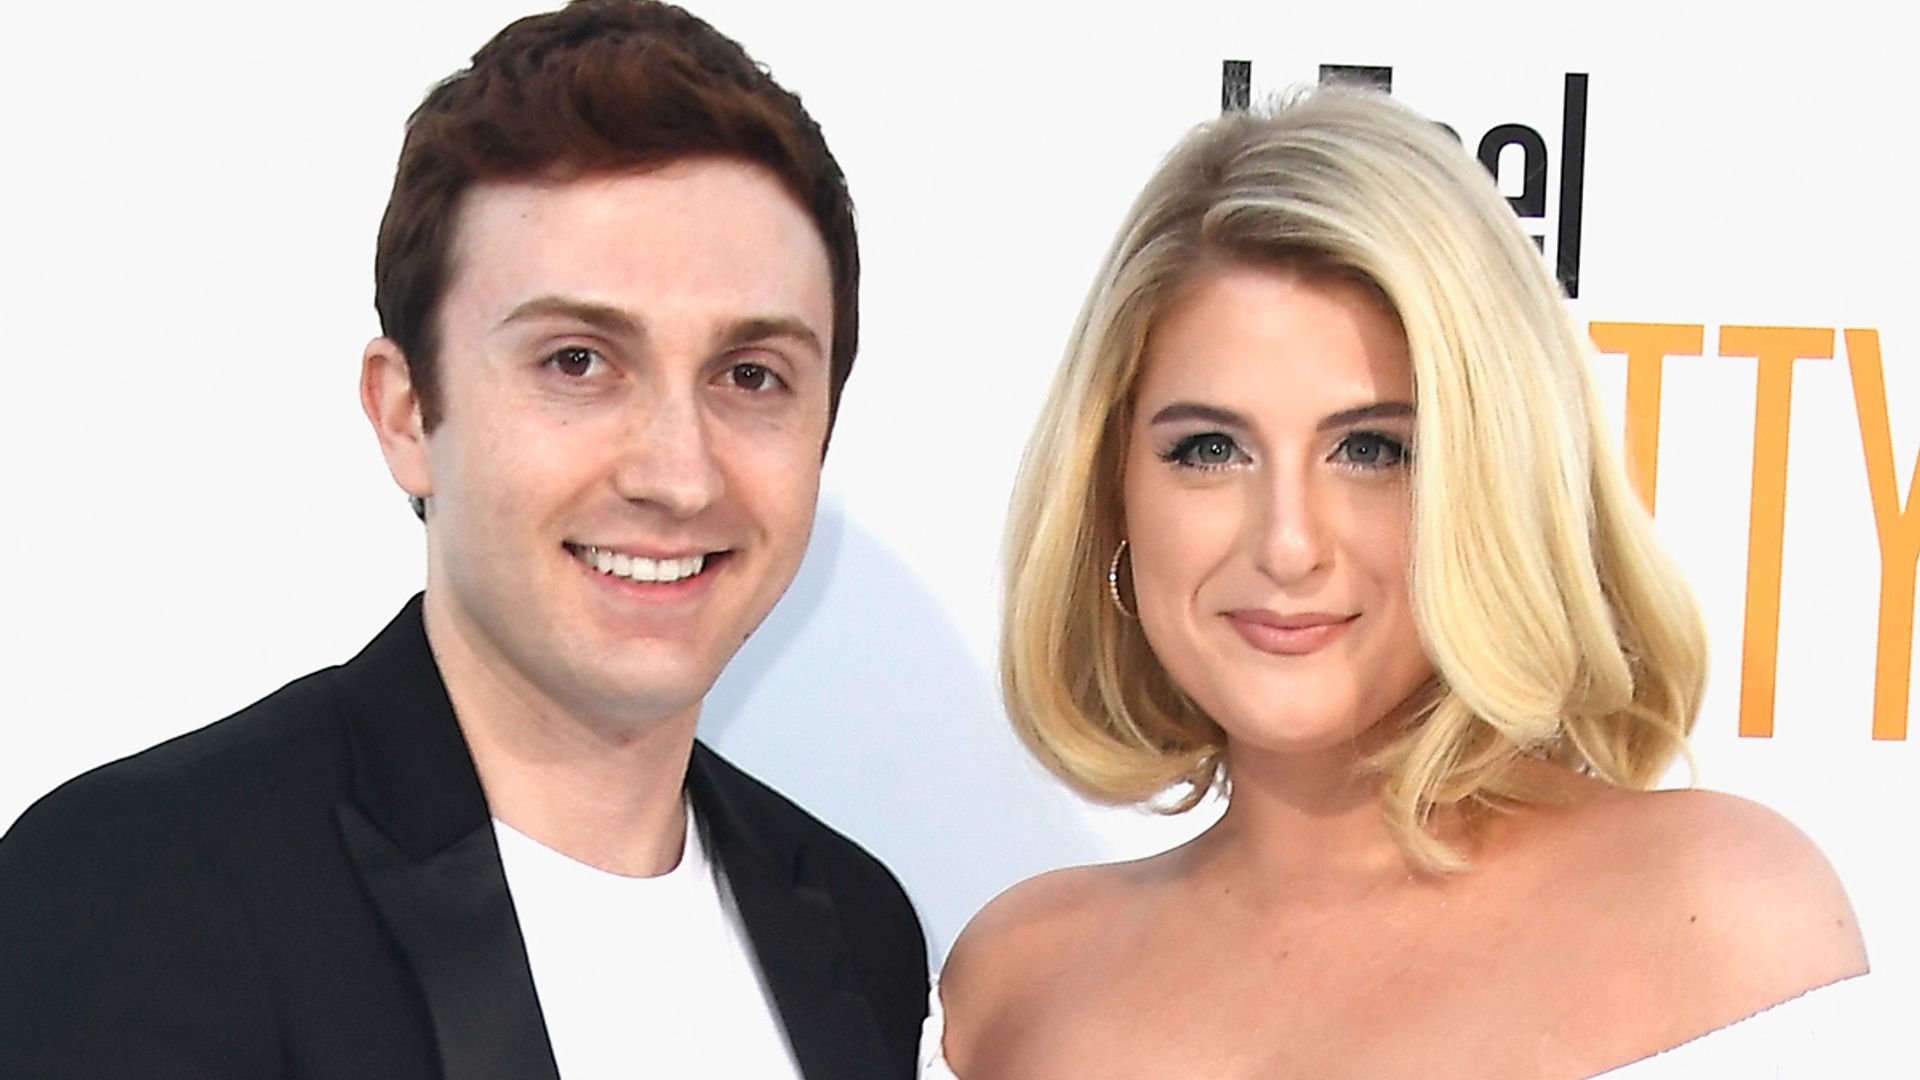 Meghan Trainor is pregnant with second child - see sweet baby scan